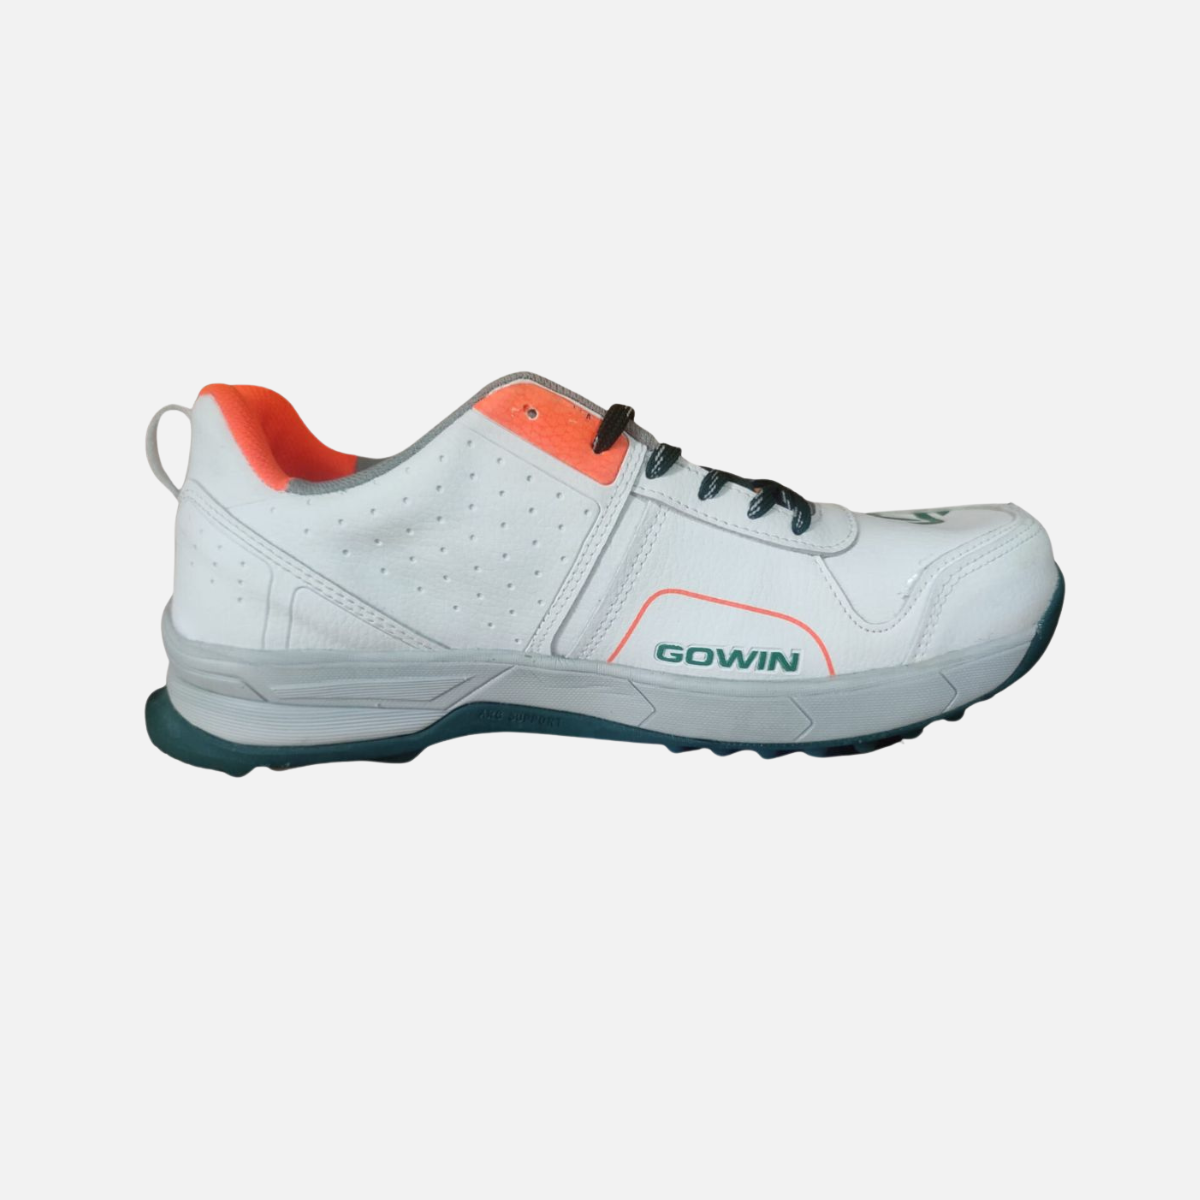 Gowin Pace-3 Cricket Shoes -White/Sea Green